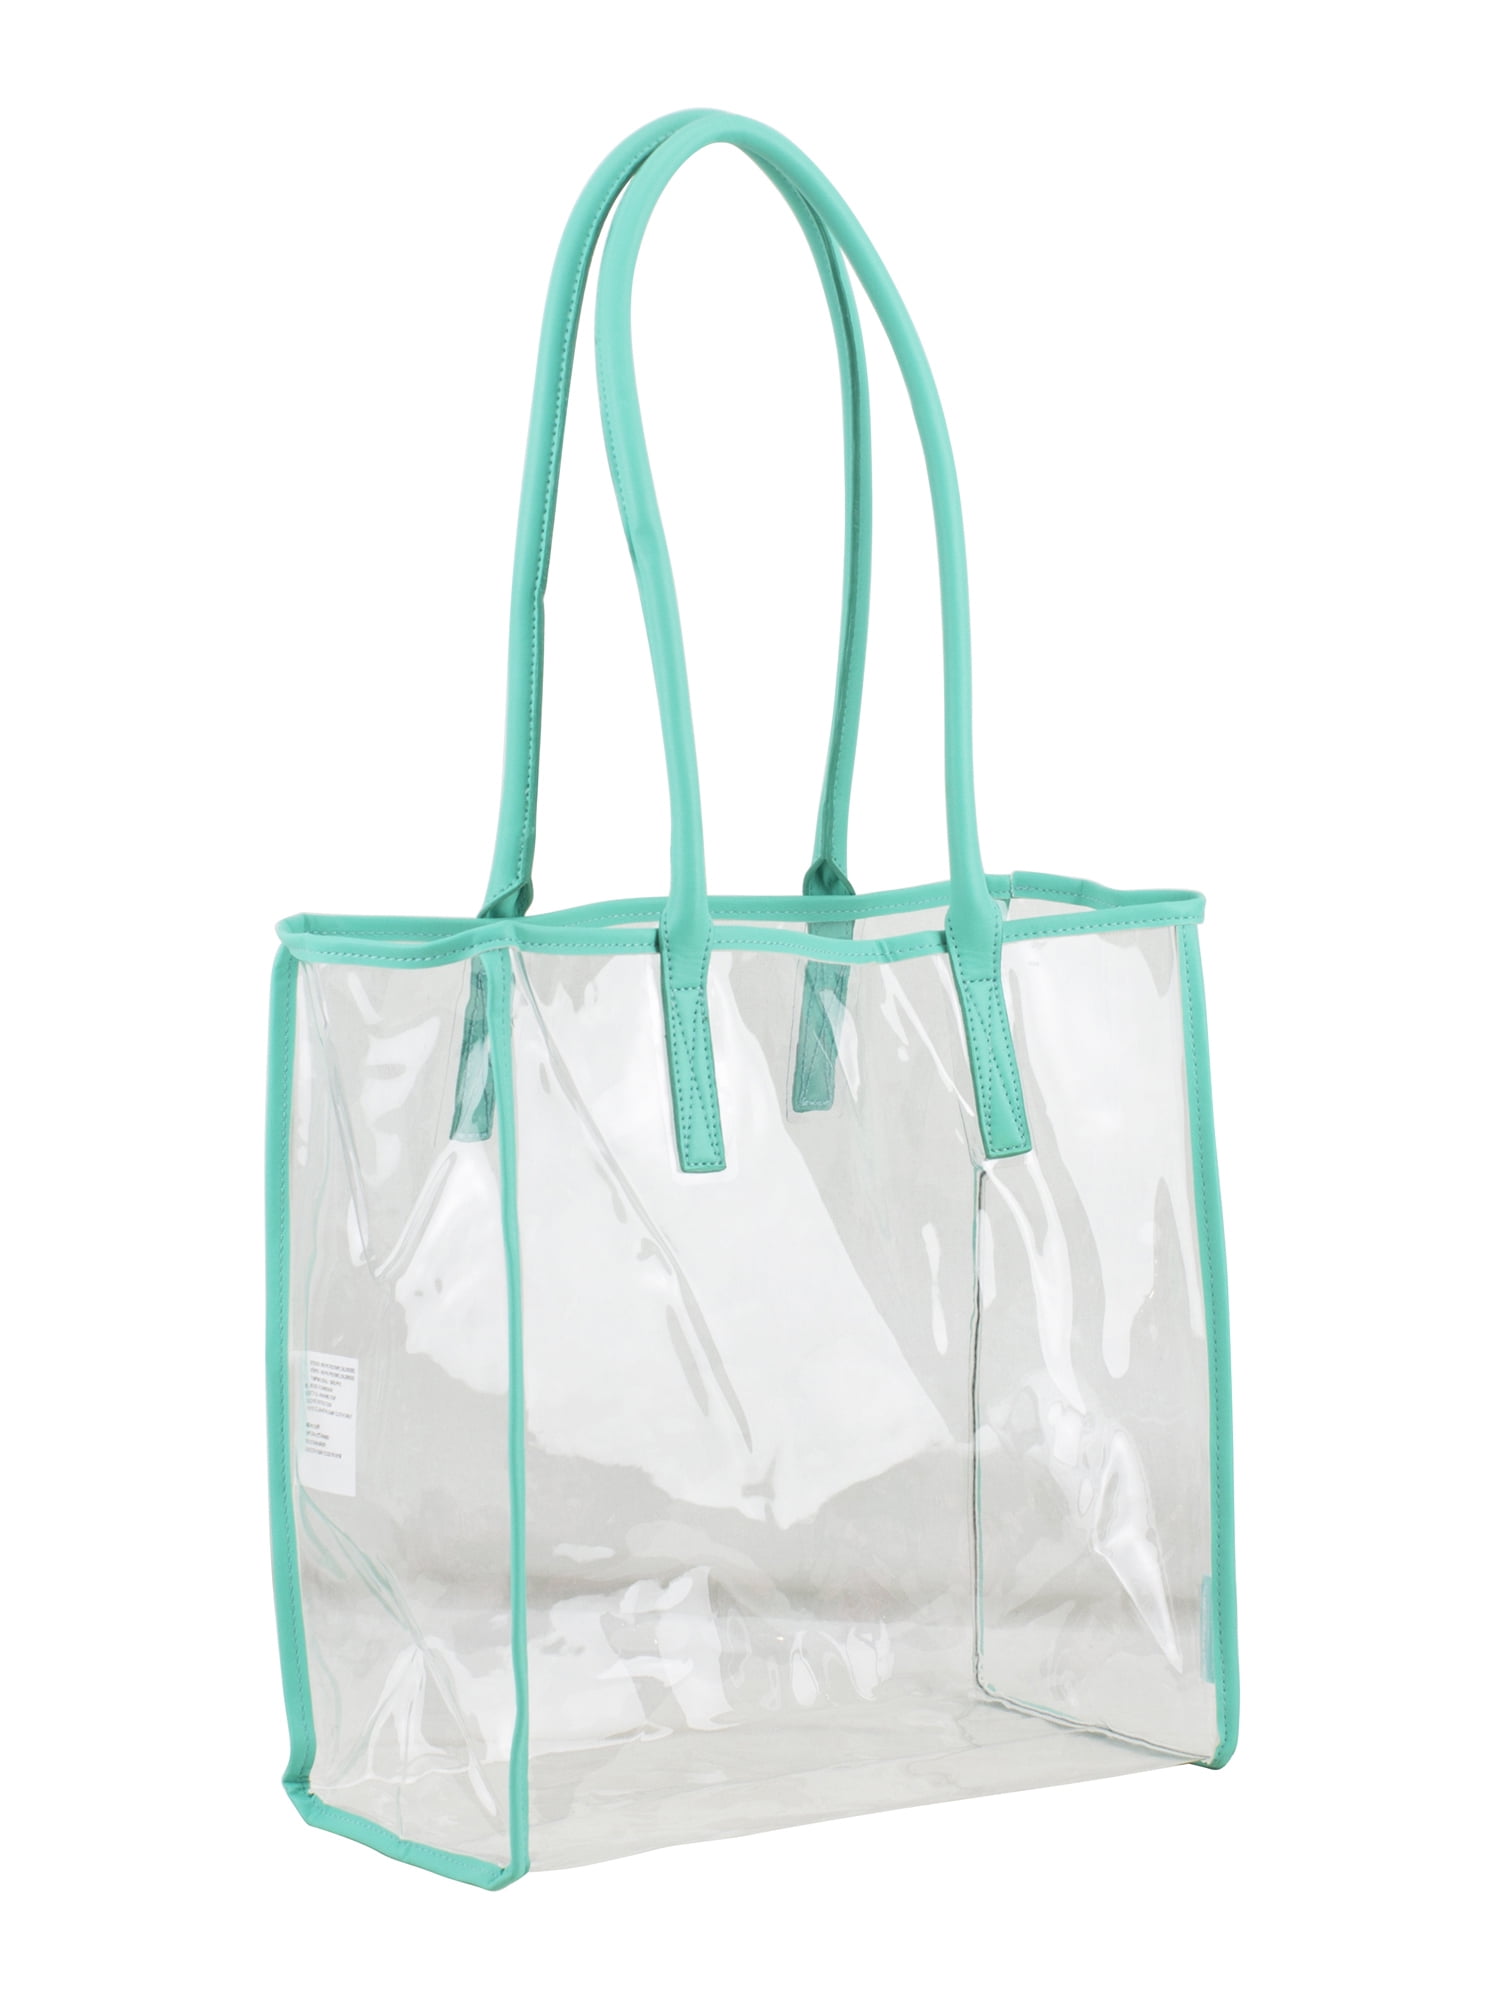 Eastsport Clear All-Purpose Security Tote, Turquoise - Walmart.com